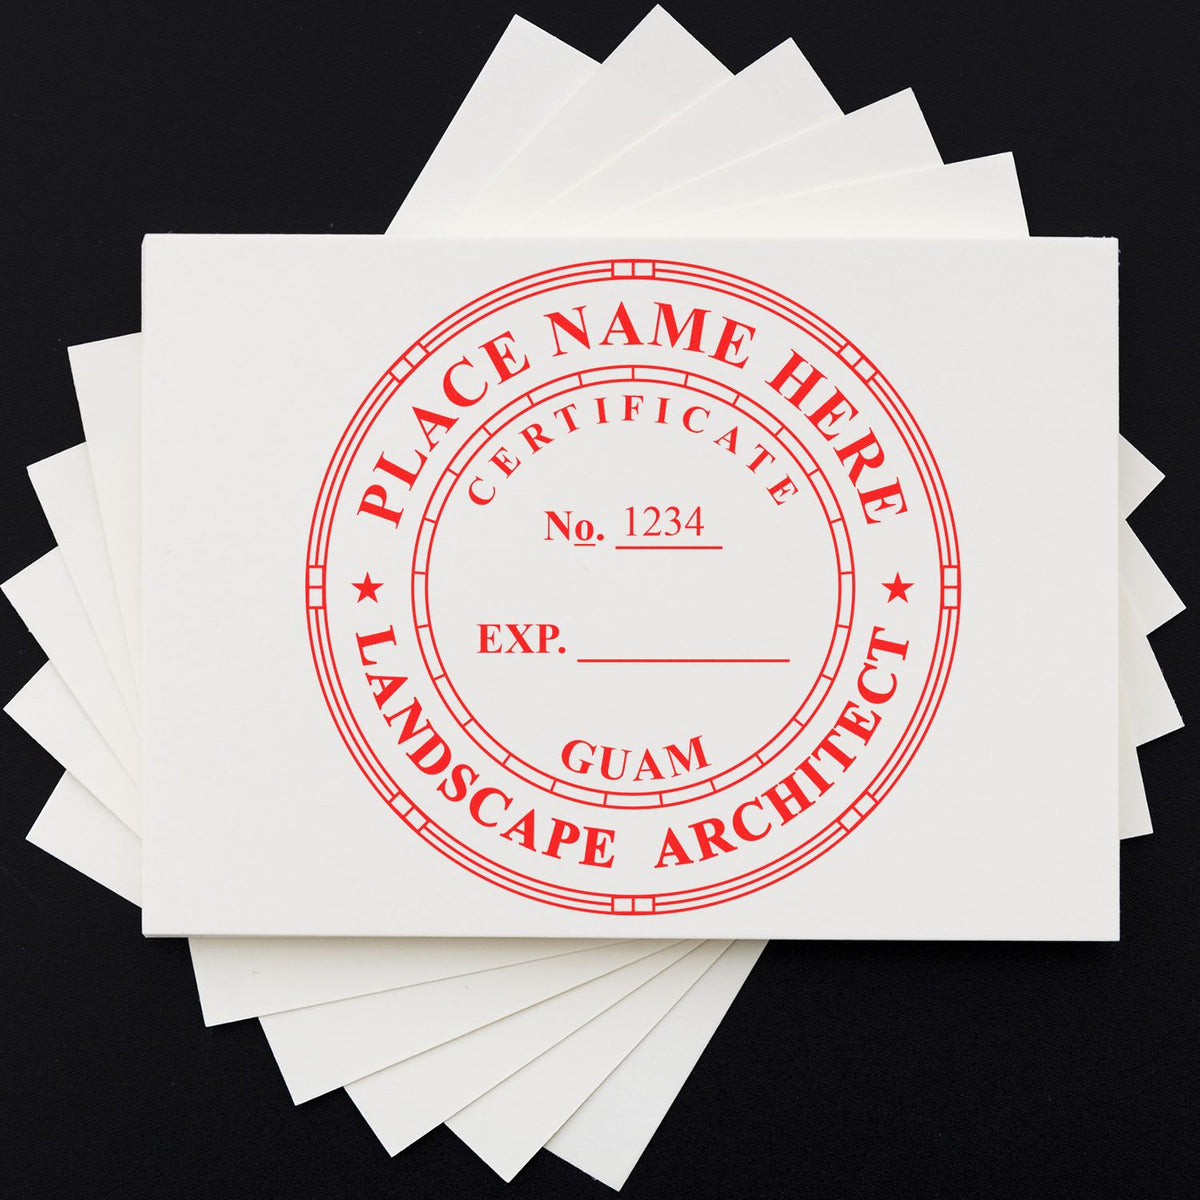 The Guam Landscape Architectural Seal Stamp stamp impression comes to life with a crisp, detailed photo on paper - showcasing true professional quality.